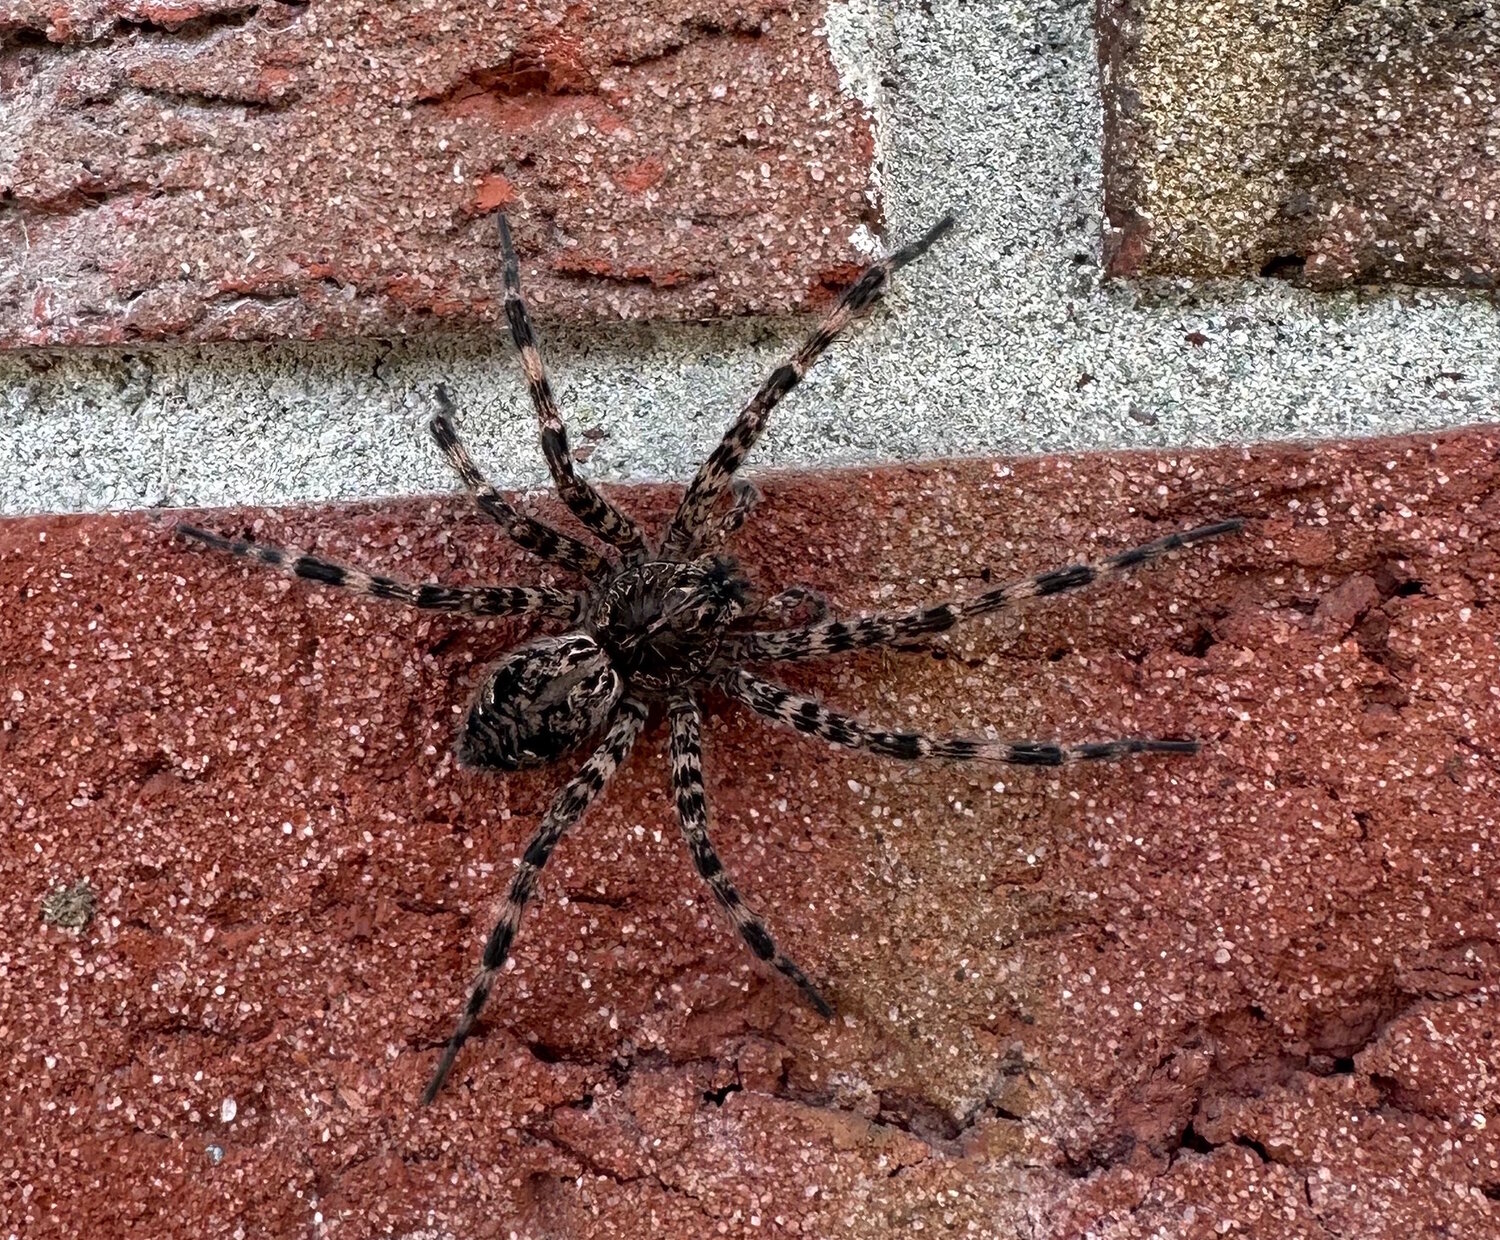 Female dark fishing spiders like this one have bodies that are typically about one inch in length, with legs that can measure over three inches long when outstretched. Males are roughly half this size.